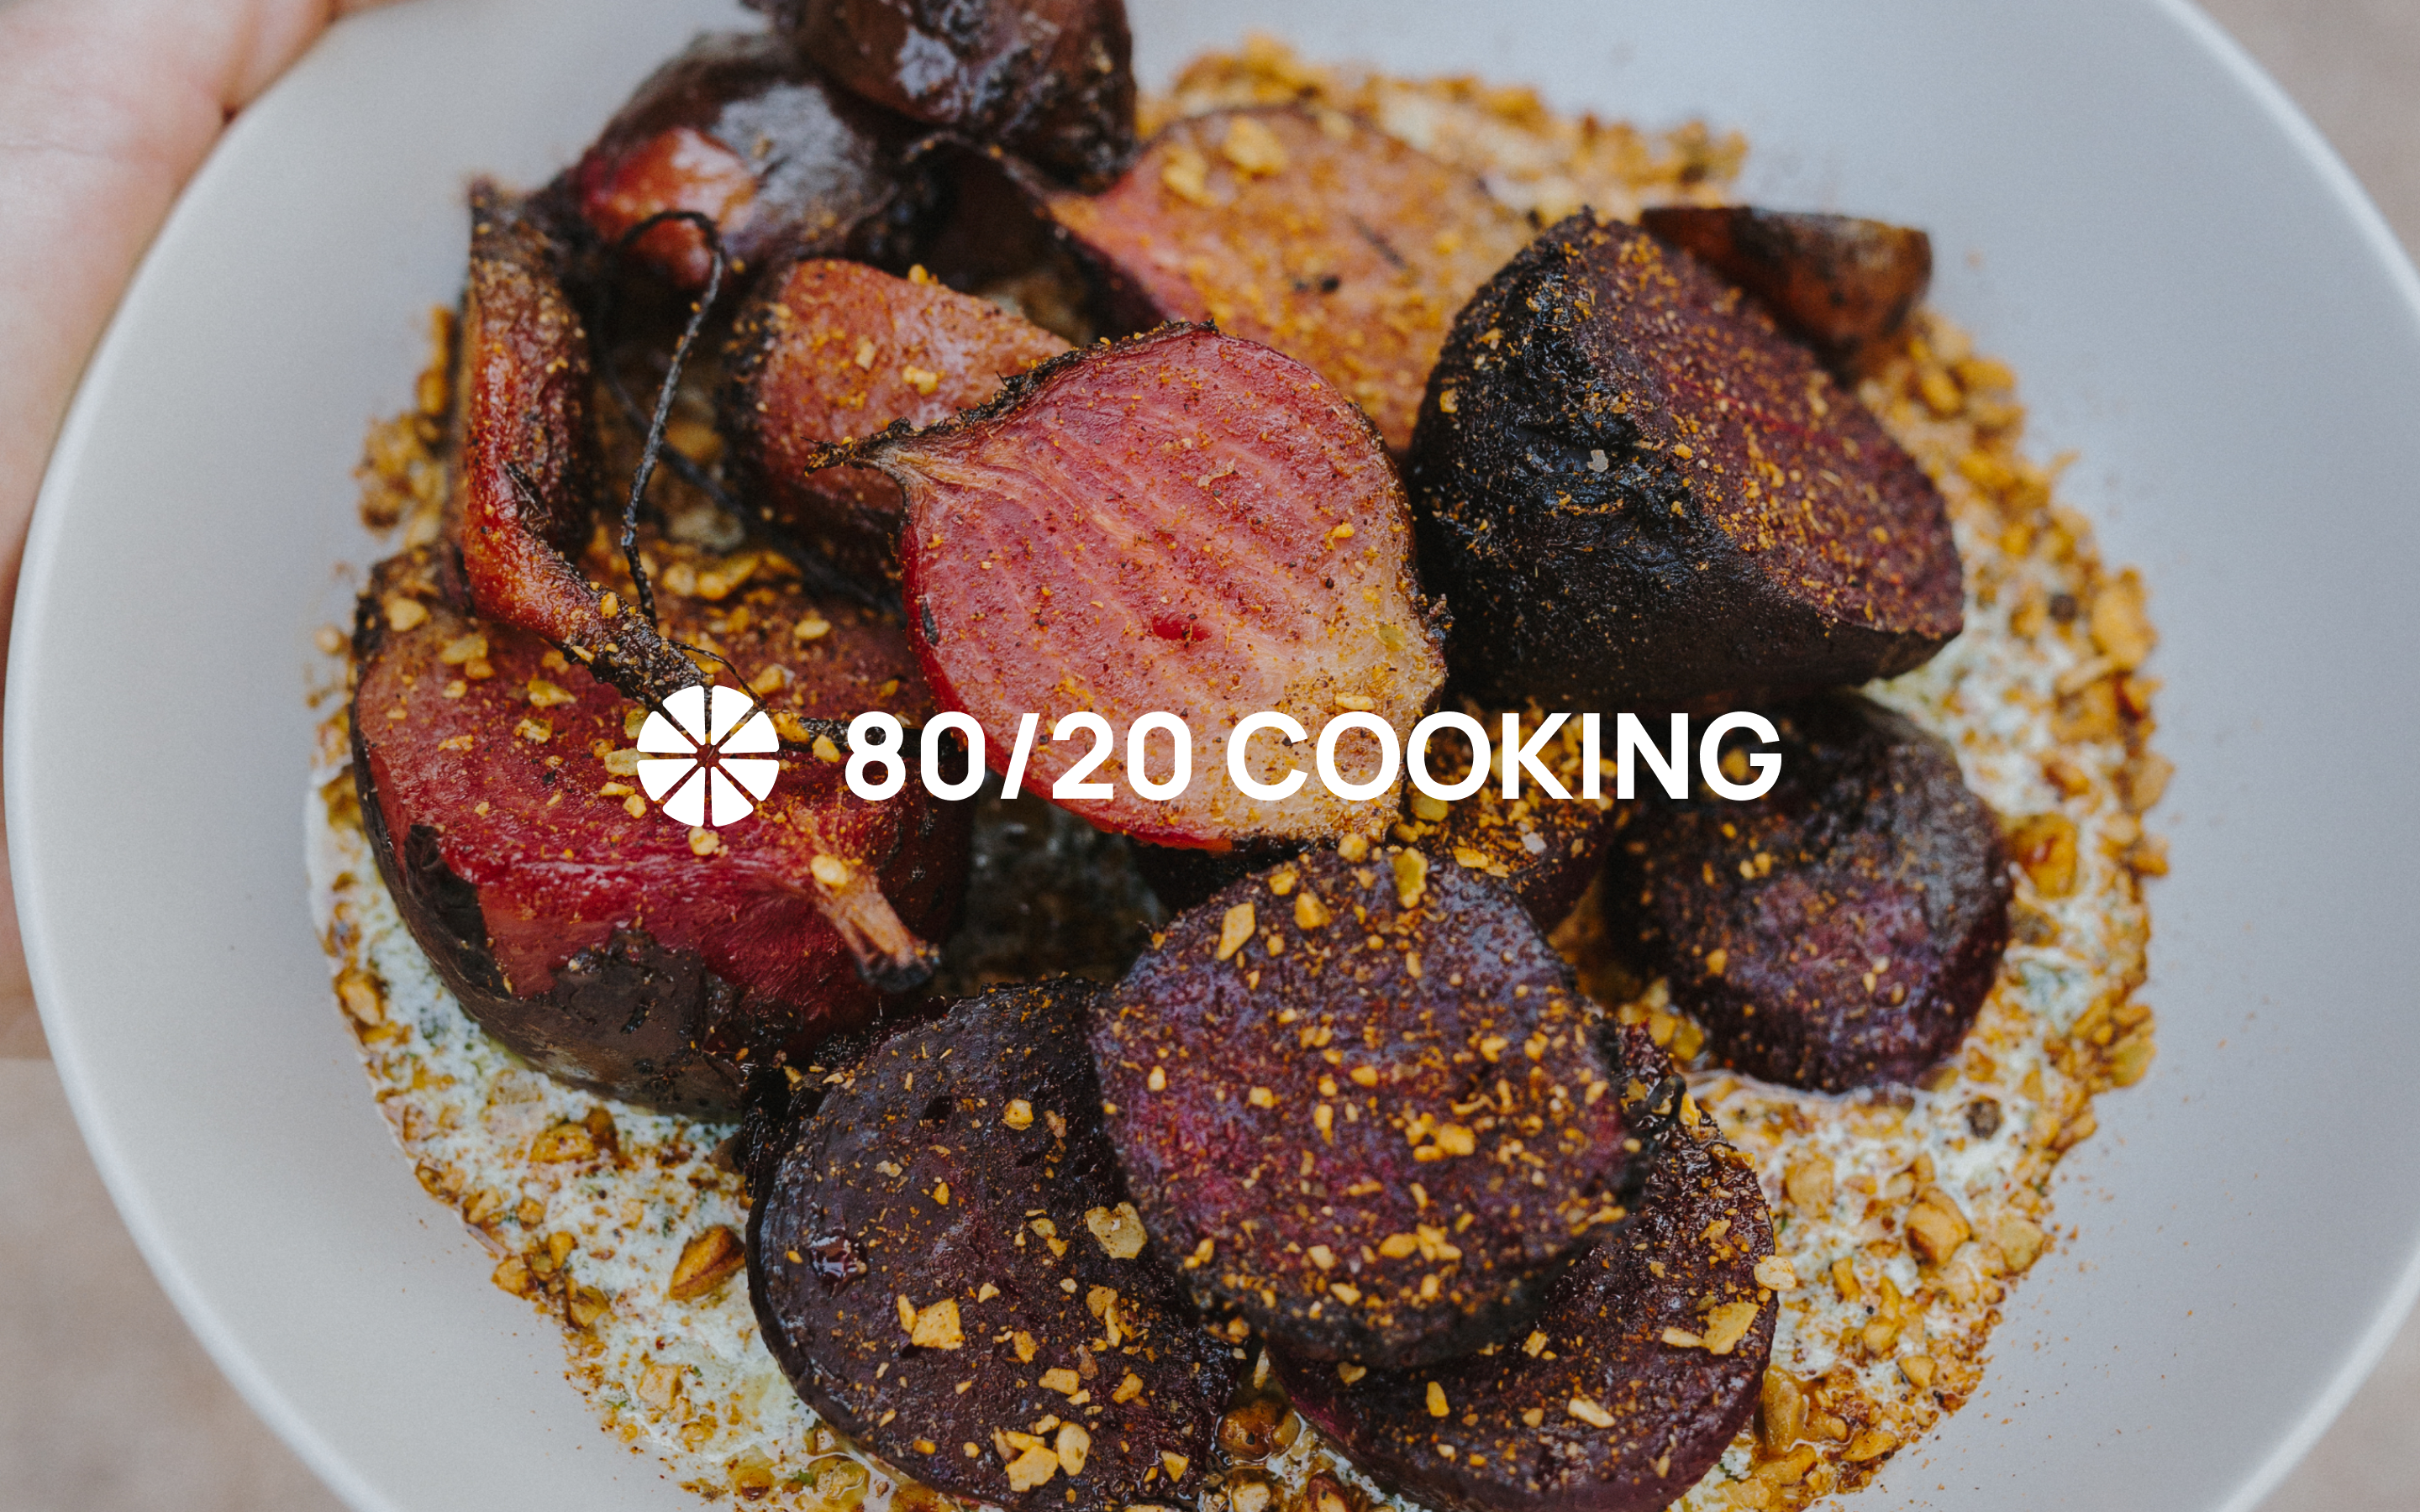 The 80/20 Cooking logo over a beautifully prepared plate of beets.